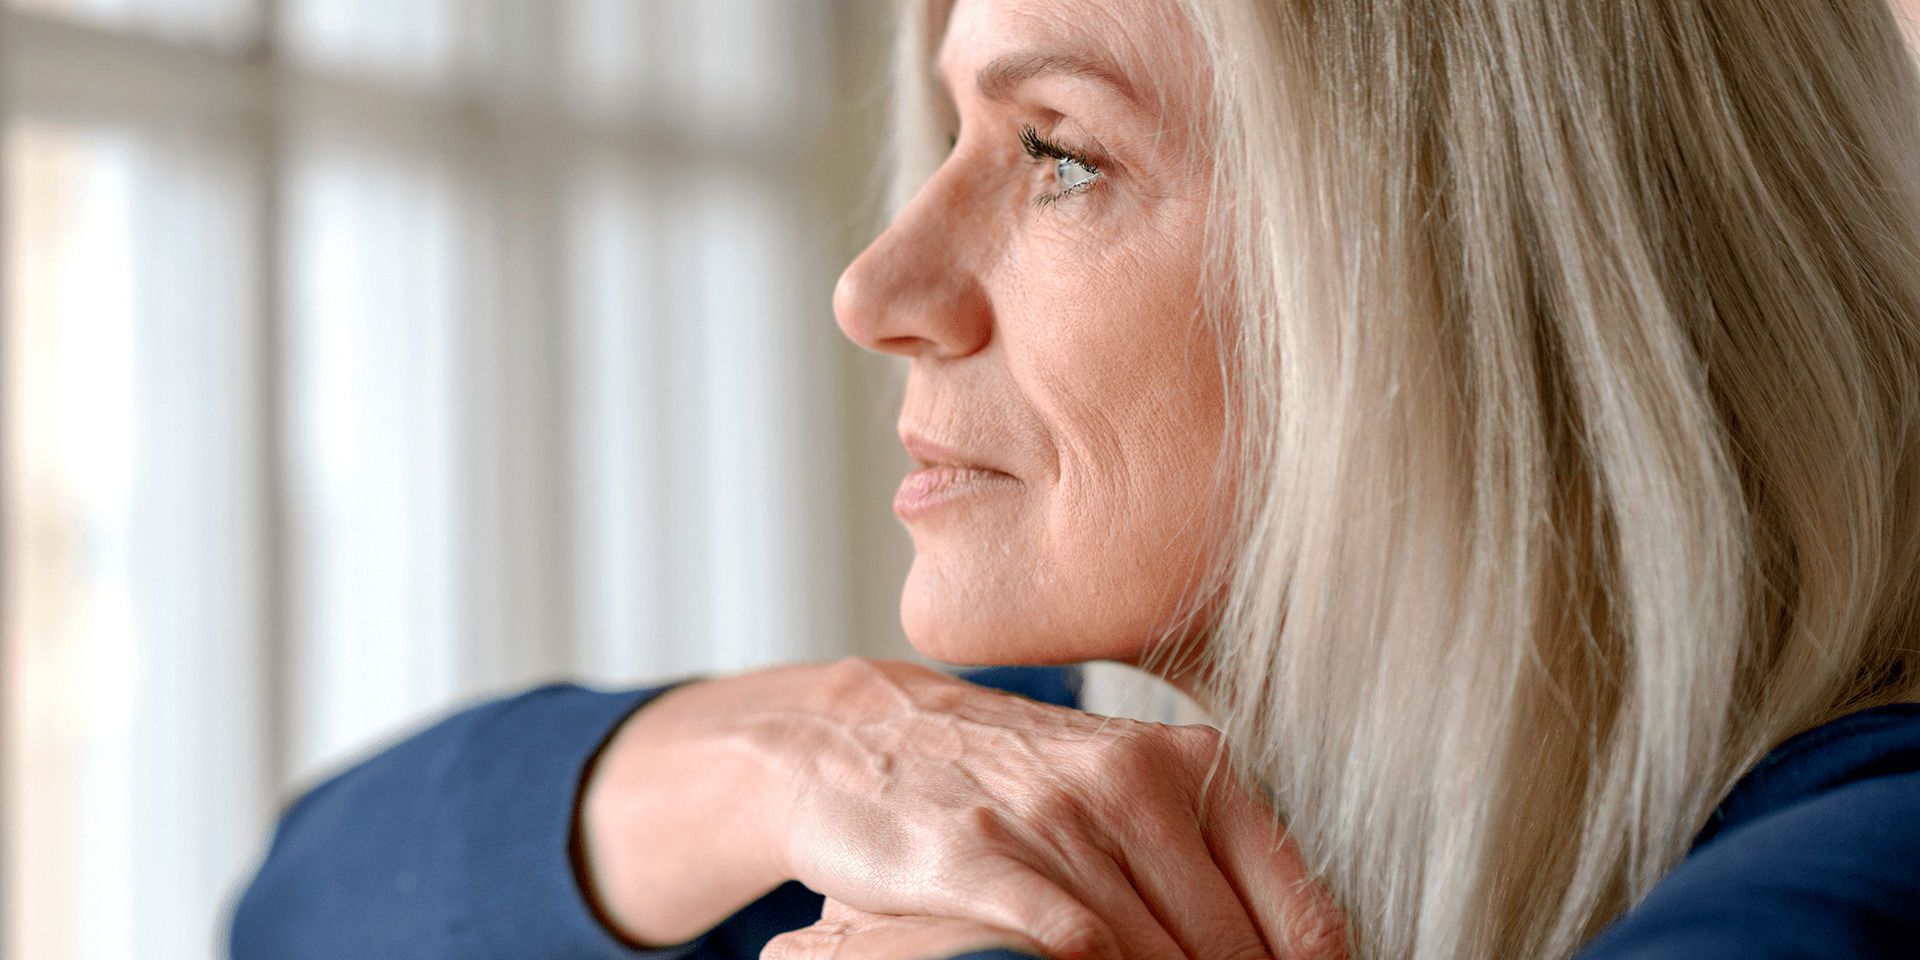 Woman with untreated hearing loss wearing a blue shirt and looking out a window